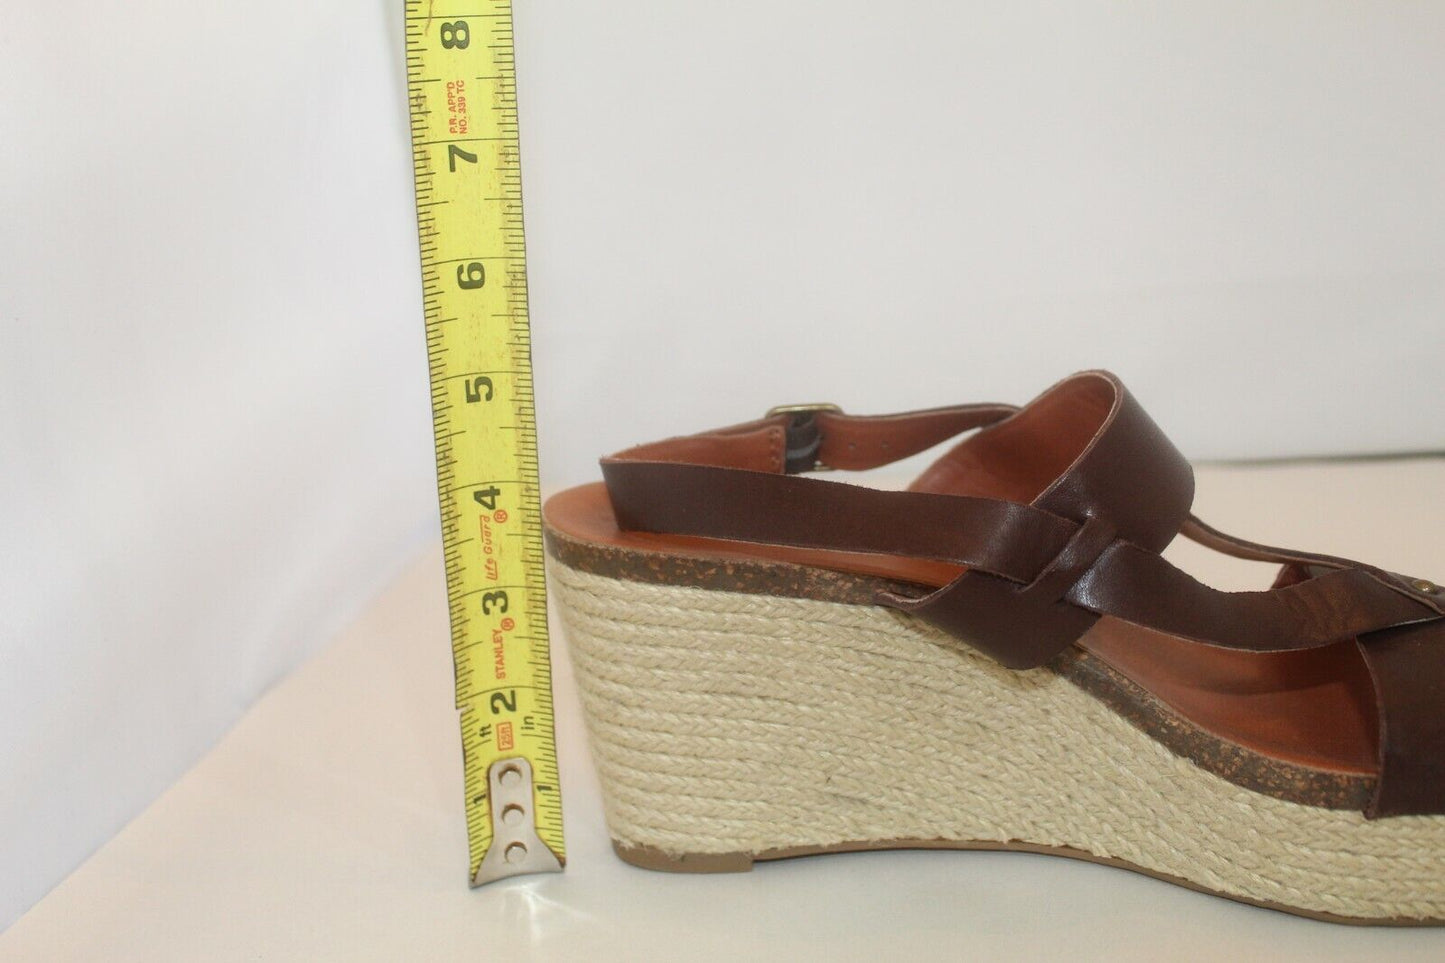 Lucky Brand Wedge Sandals Straw Open Toe Brown Shoes Buckles Boho Shoes Size 9.5